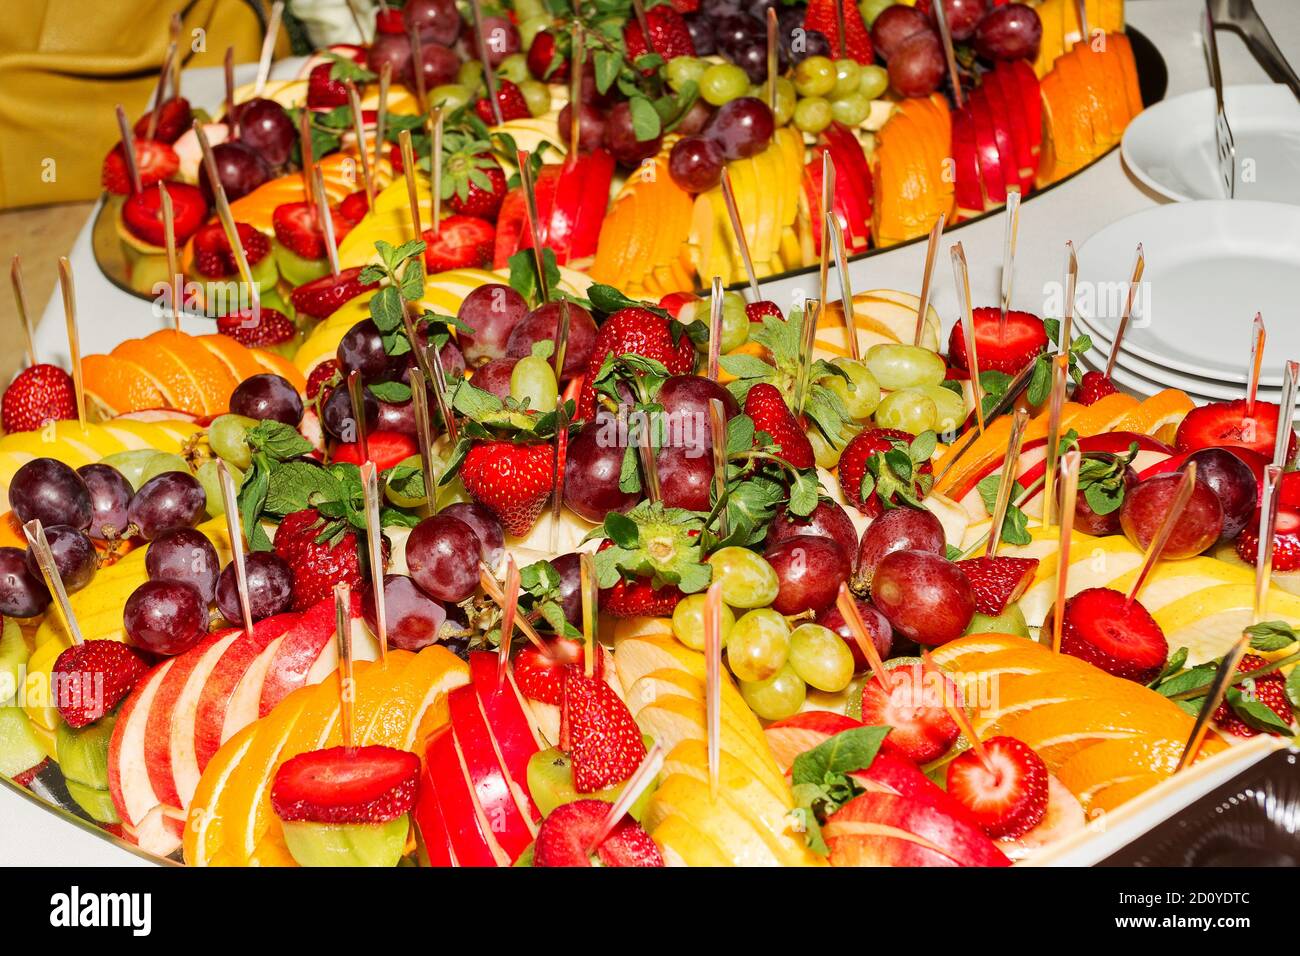 Authentic buffet, assorted fresh fruits, berries and citrus fruits. Morning atmospheric lighting, fashionable trendy spot soft focus. Stock Photo